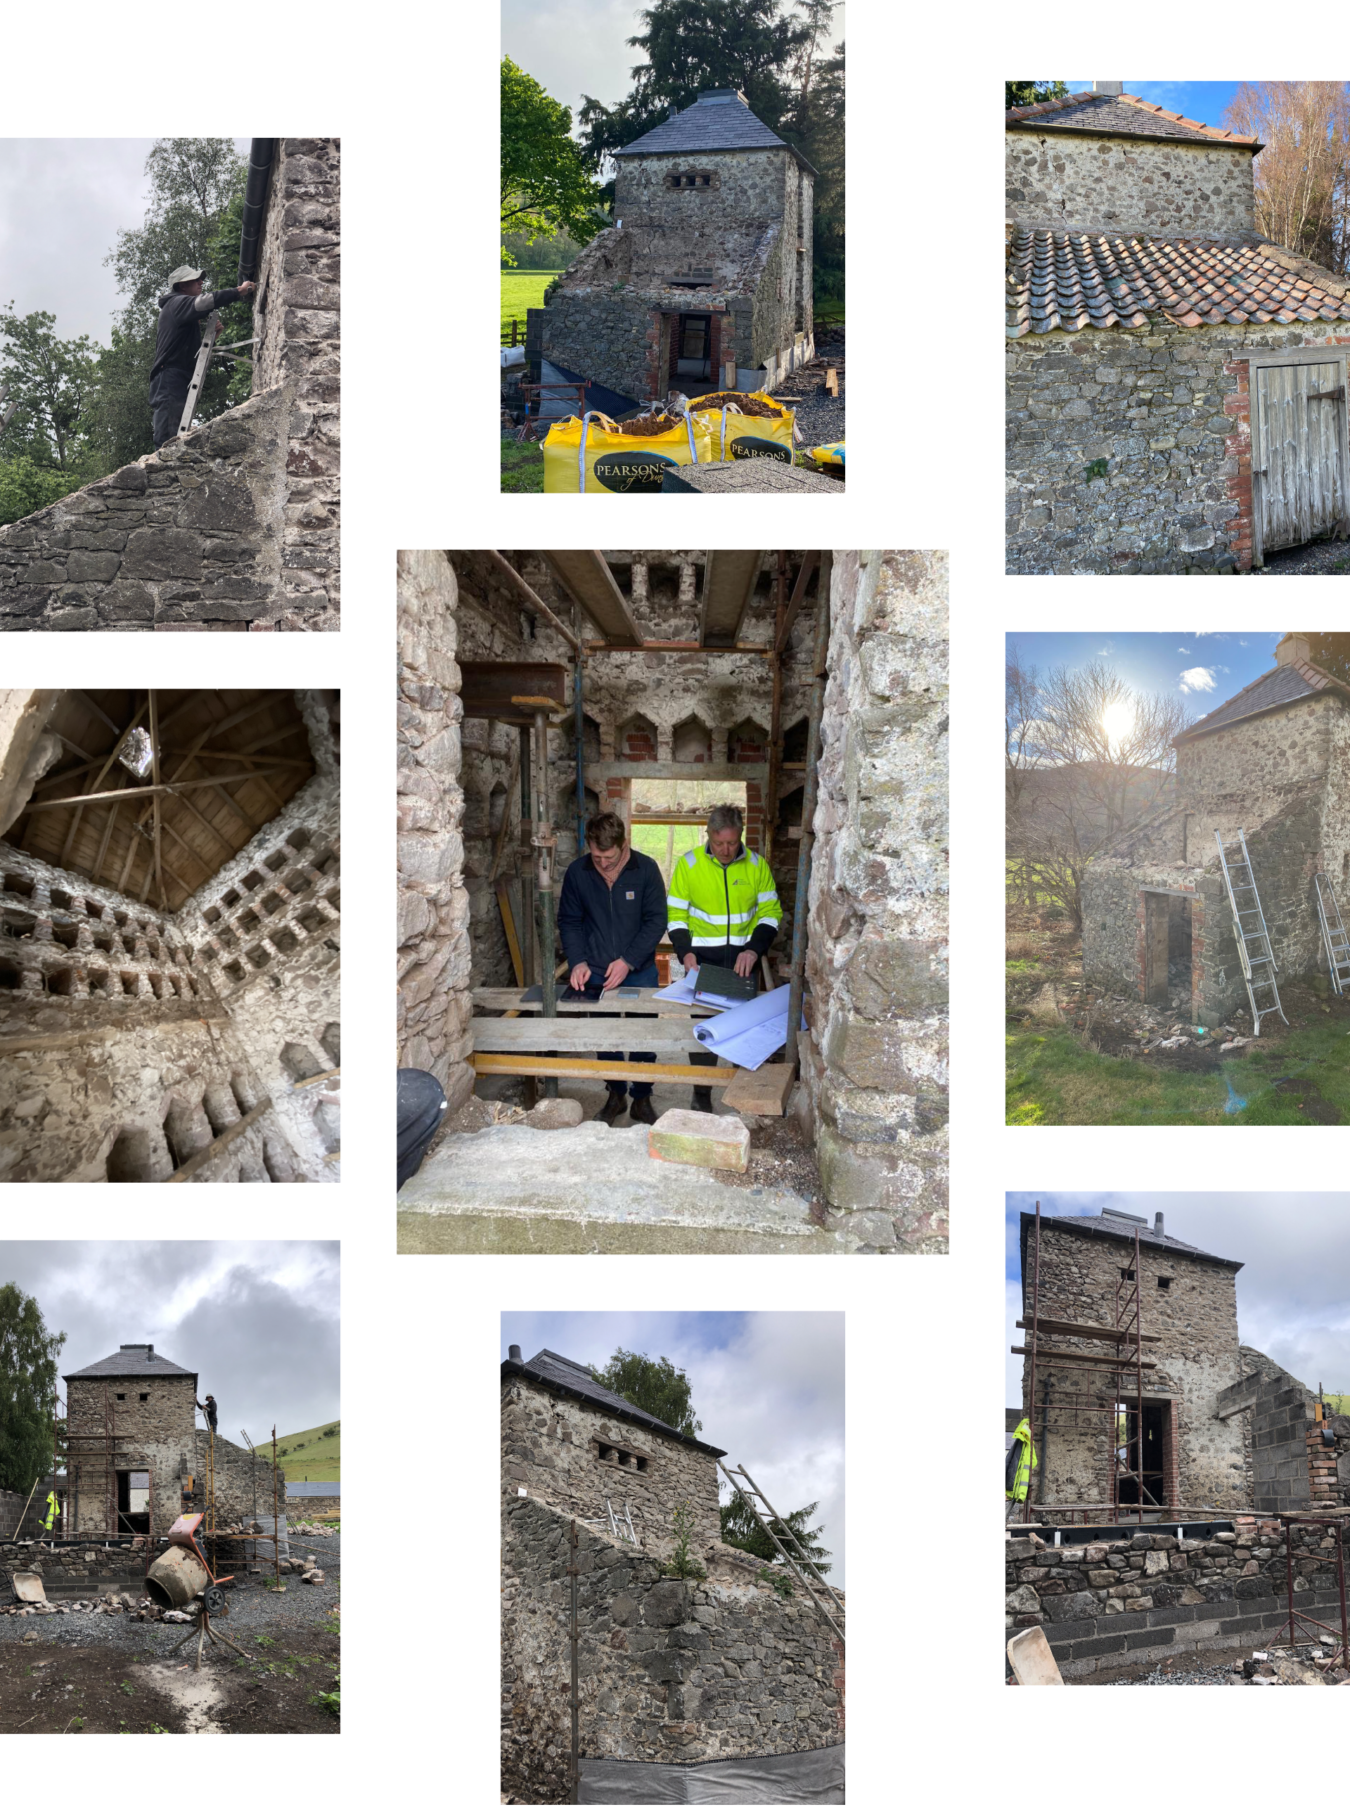 Grid of images showing the Dovecot at Reedsford in various states of 